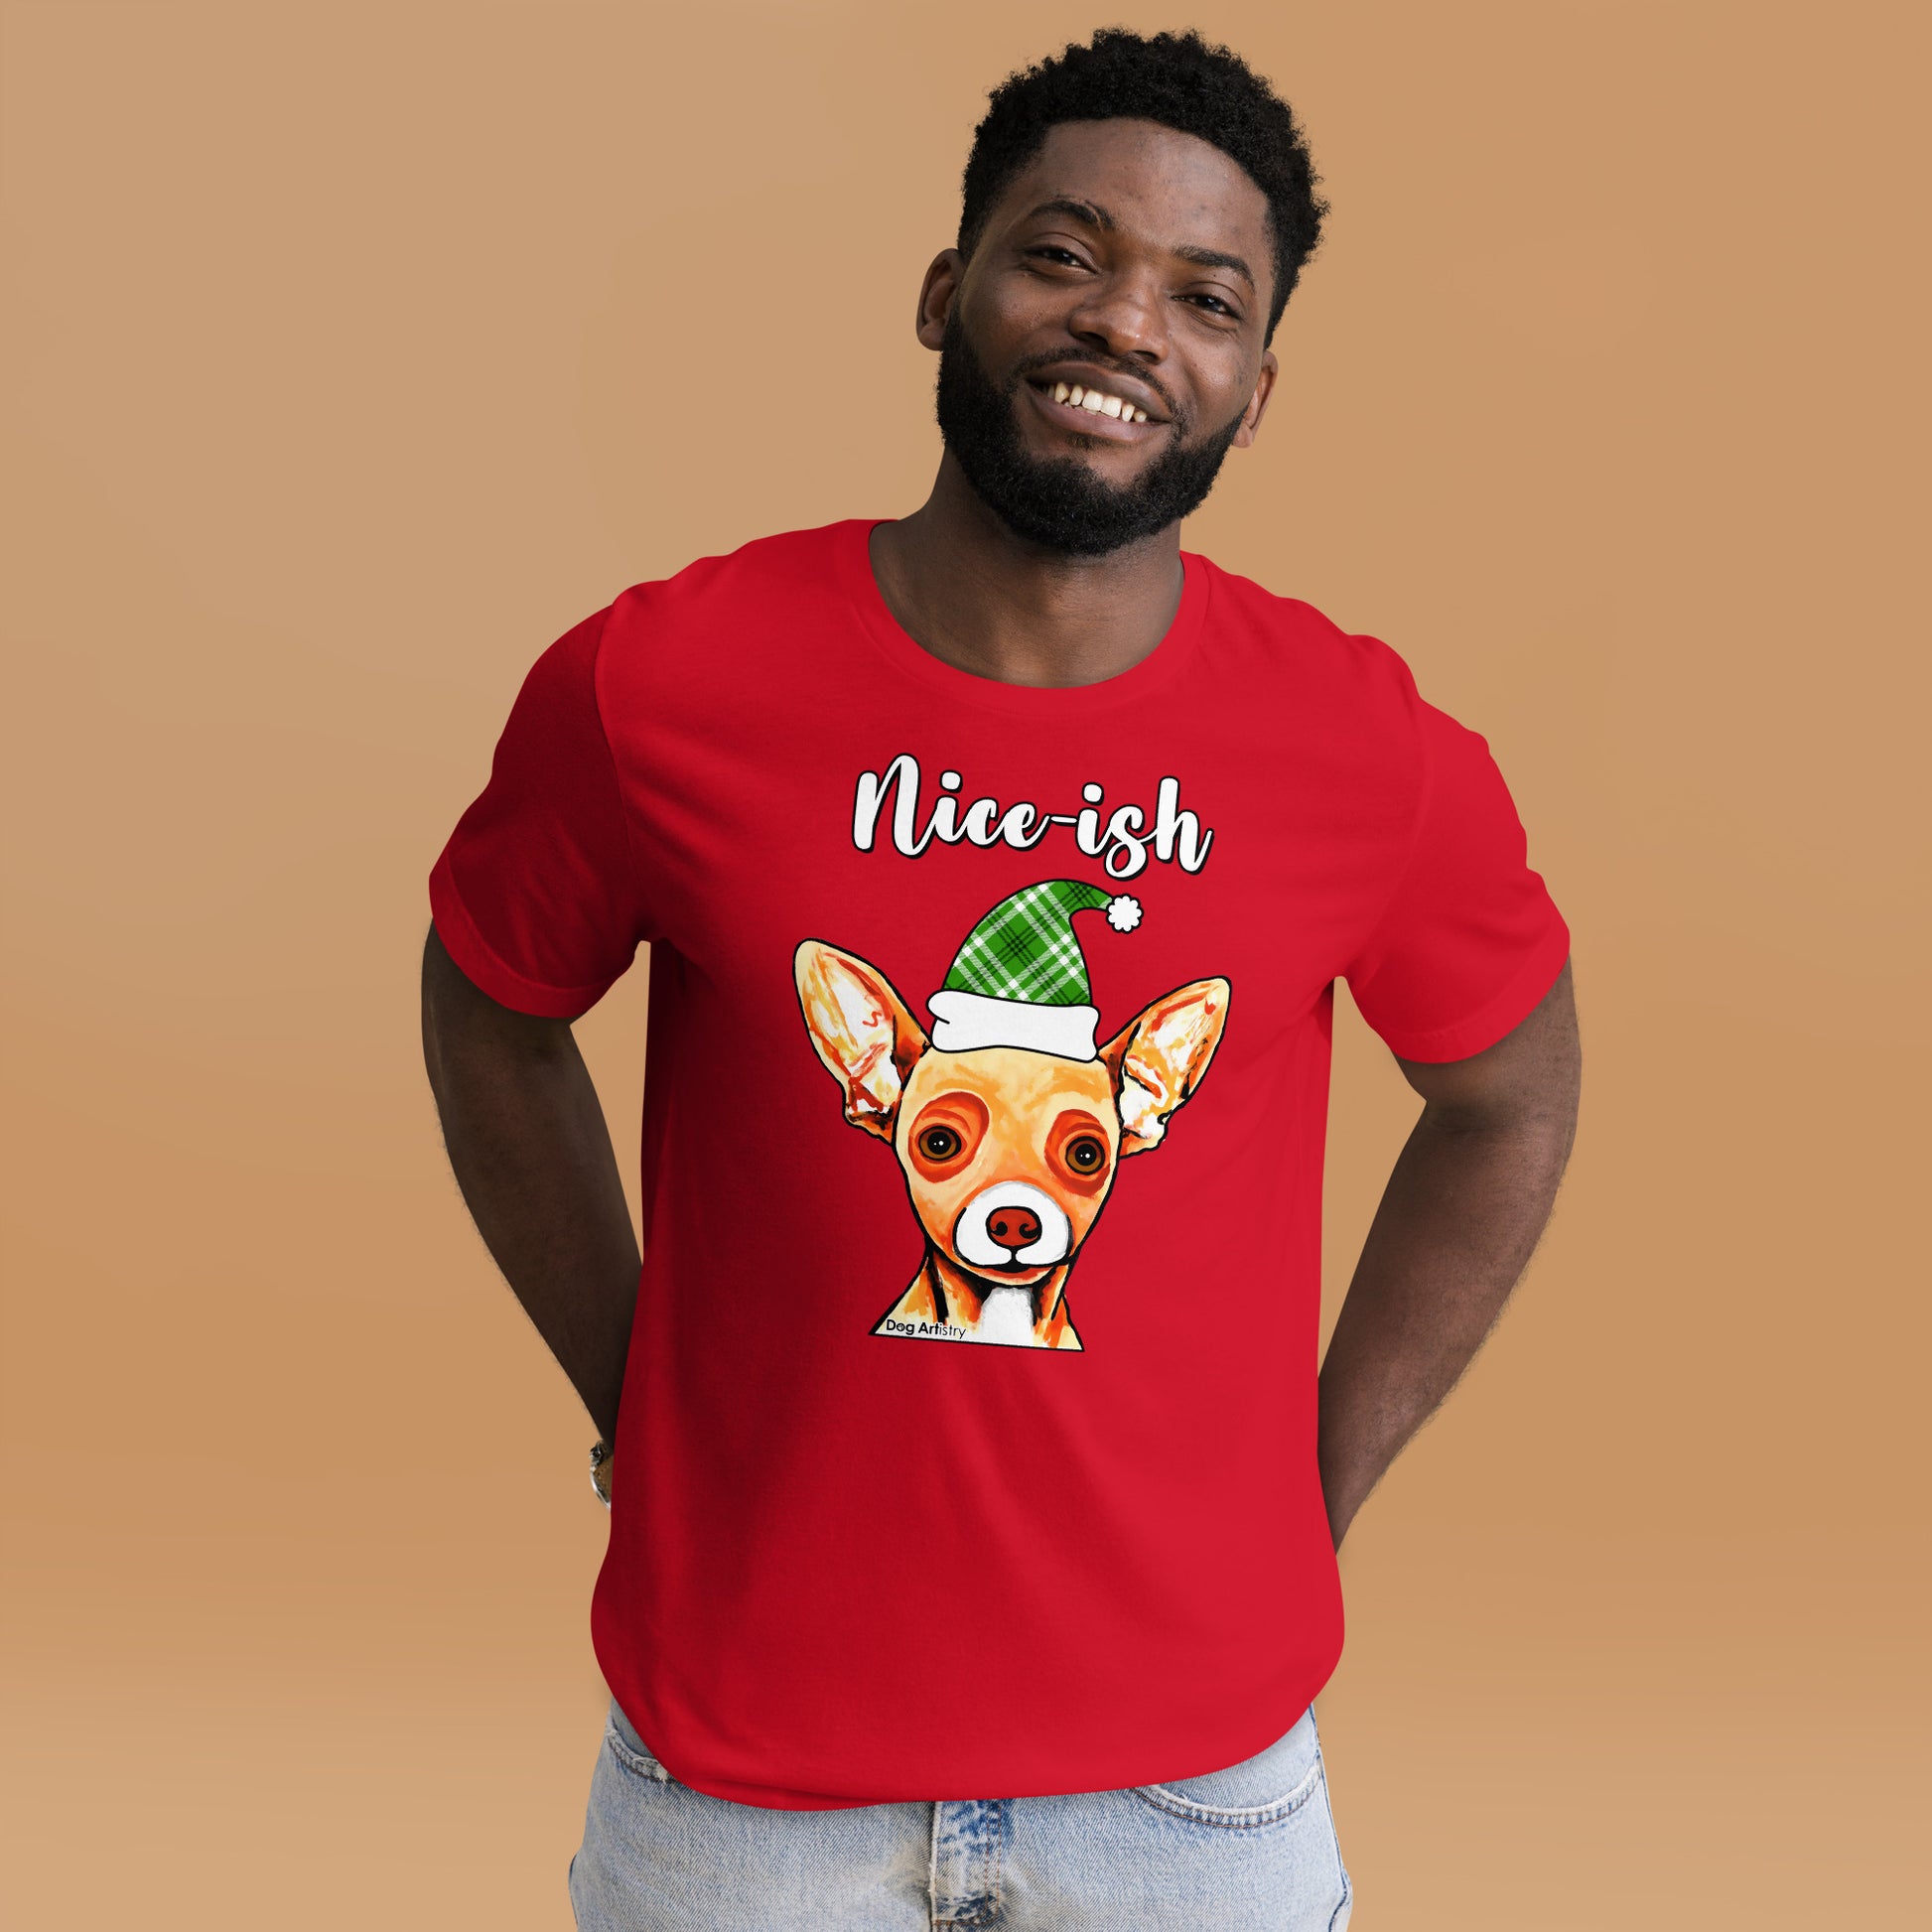 Nice-ish Chihuahua unisex t-shirt red by Dog Artistry.